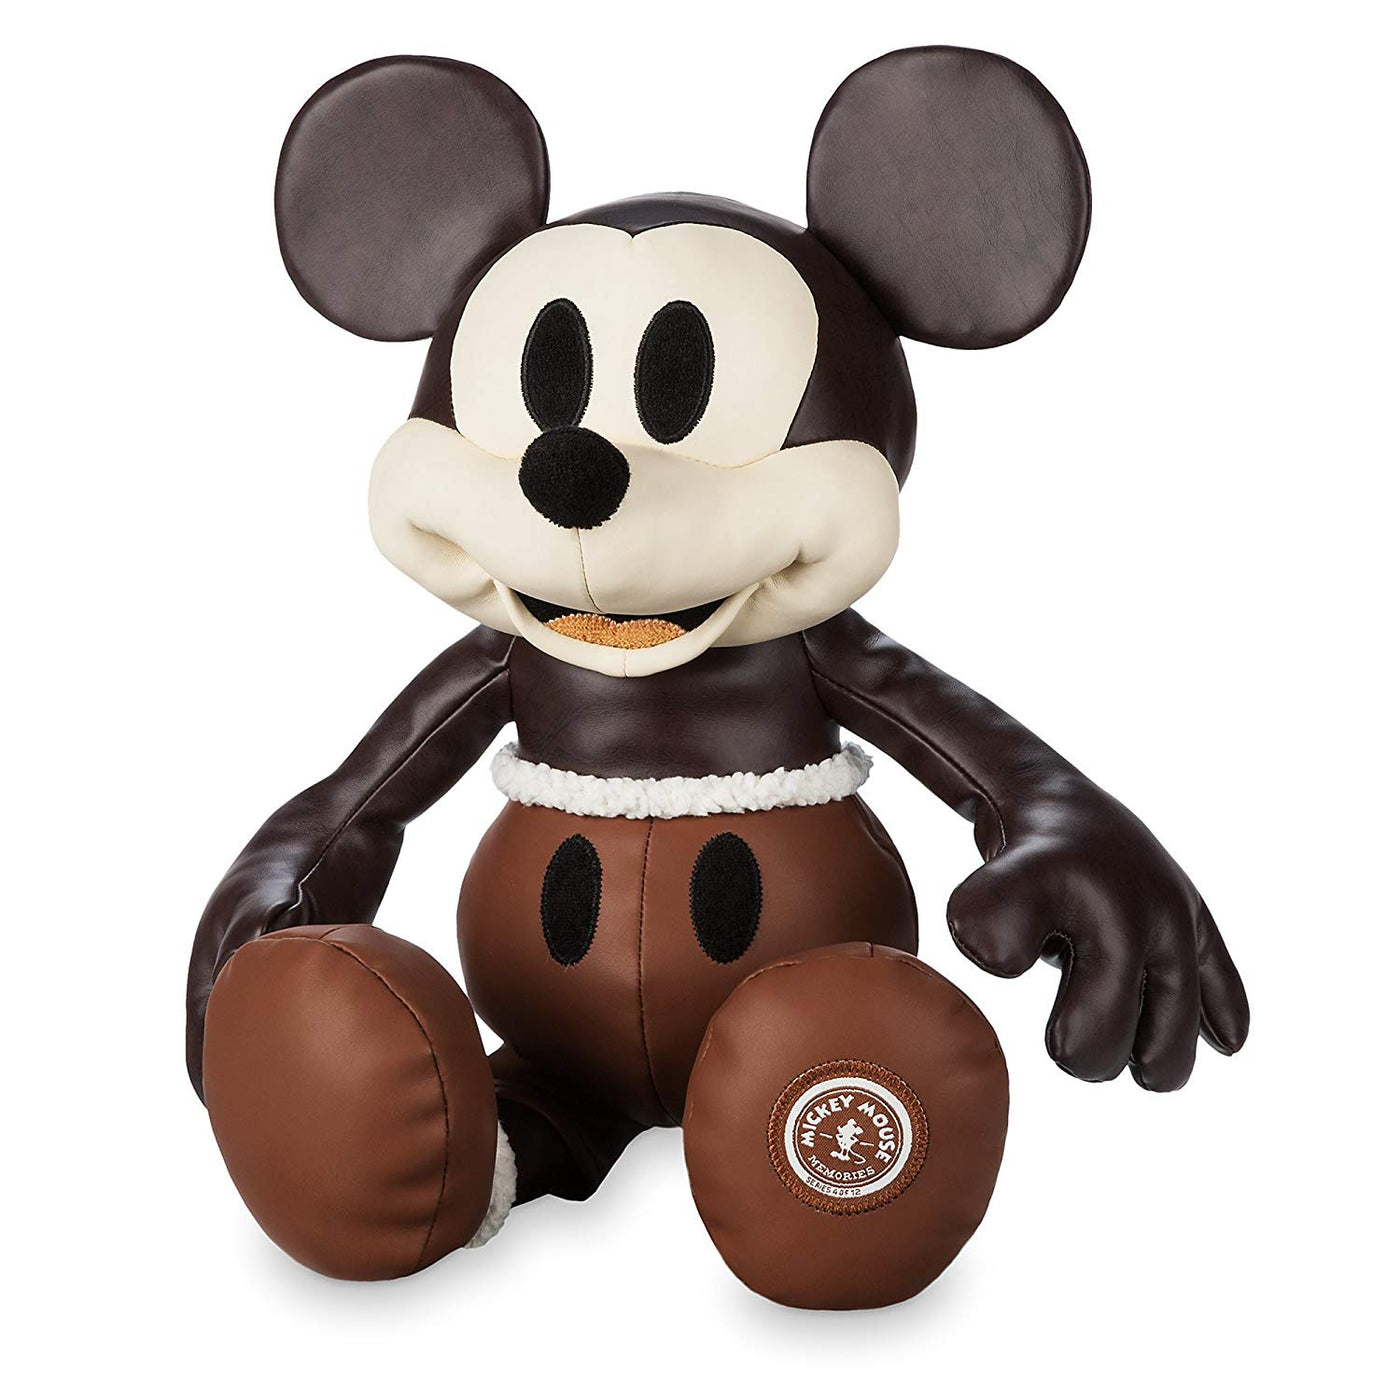 Disney Store Mickey Memories April Limited Plush New with Tags with Defects